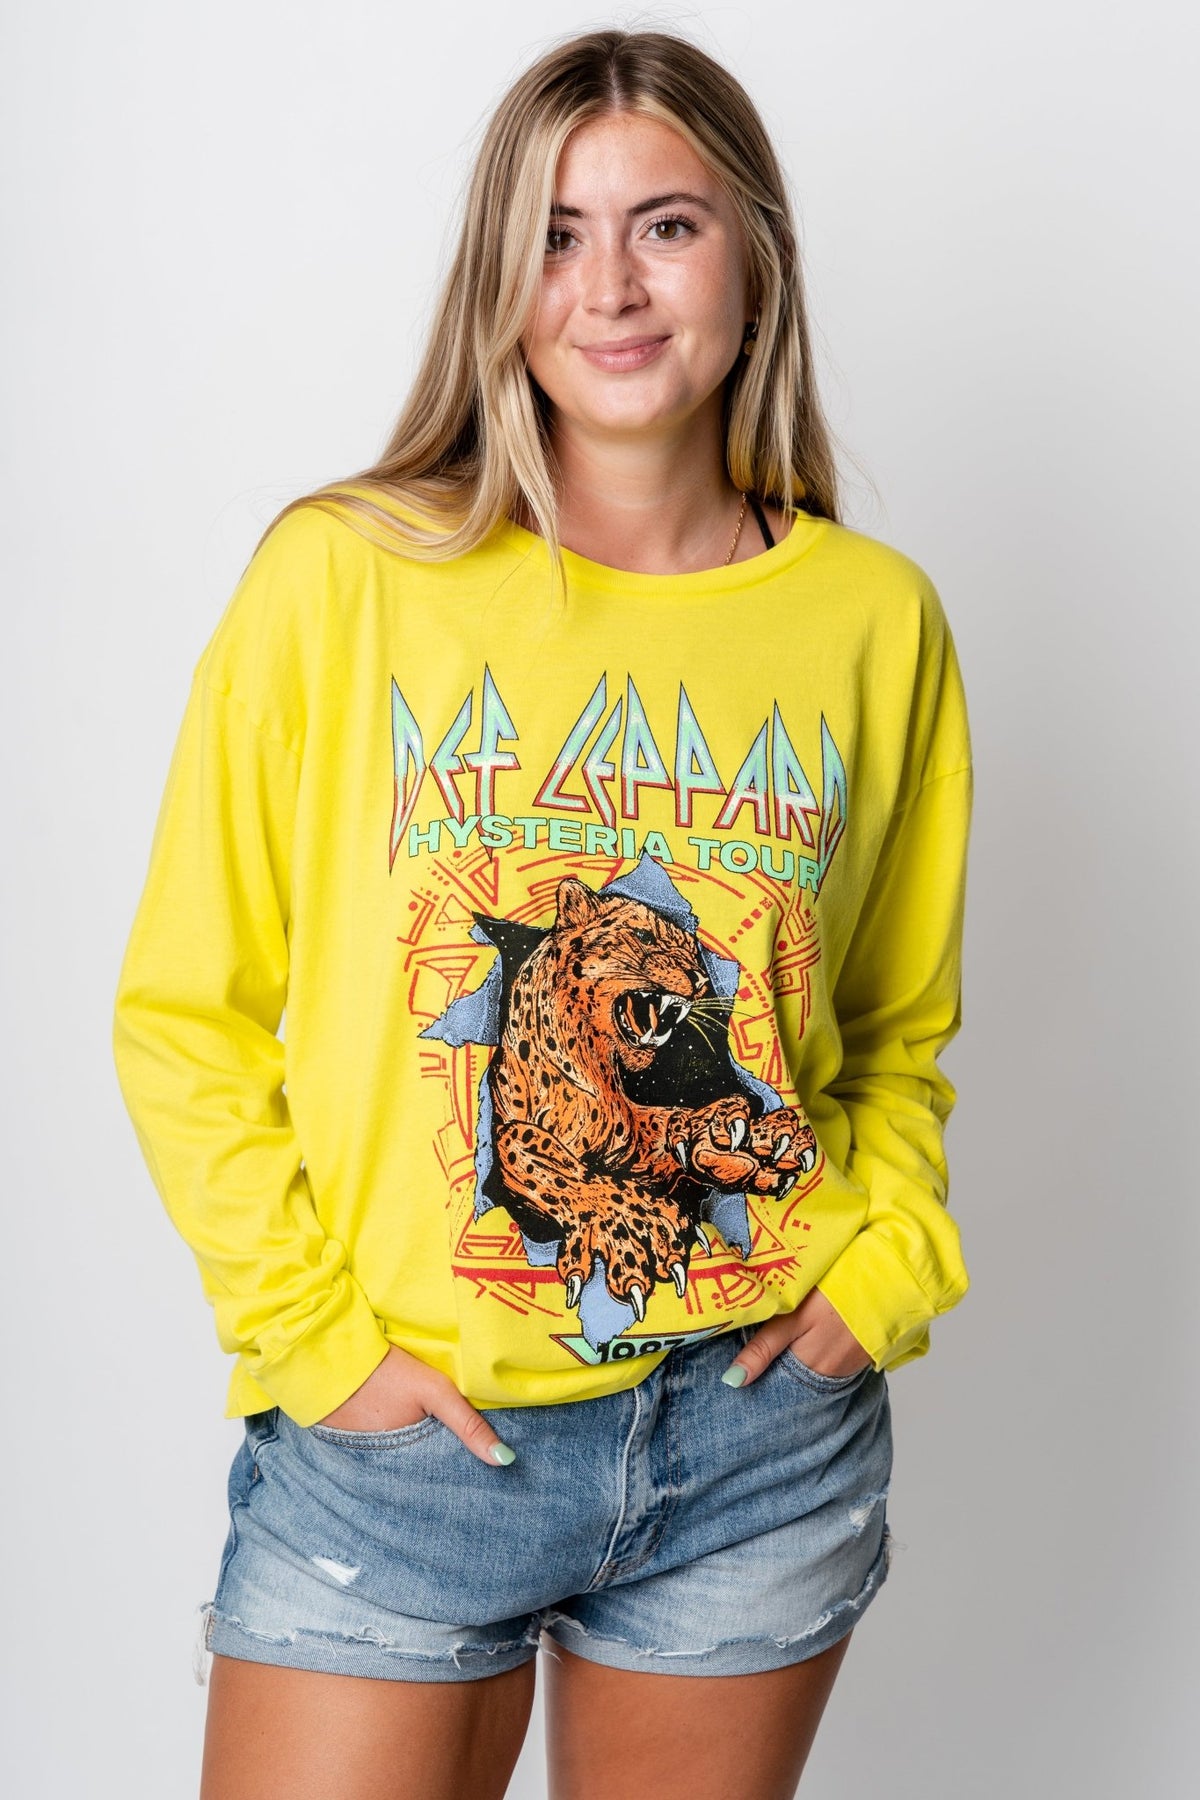 DayDreamer Def Leppard hysteria tour long sleeve tee lemon tonic - Trendy Band T-Shirts and Sweatshirts at Lush Fashion Lounge Boutique in Oklahoma City